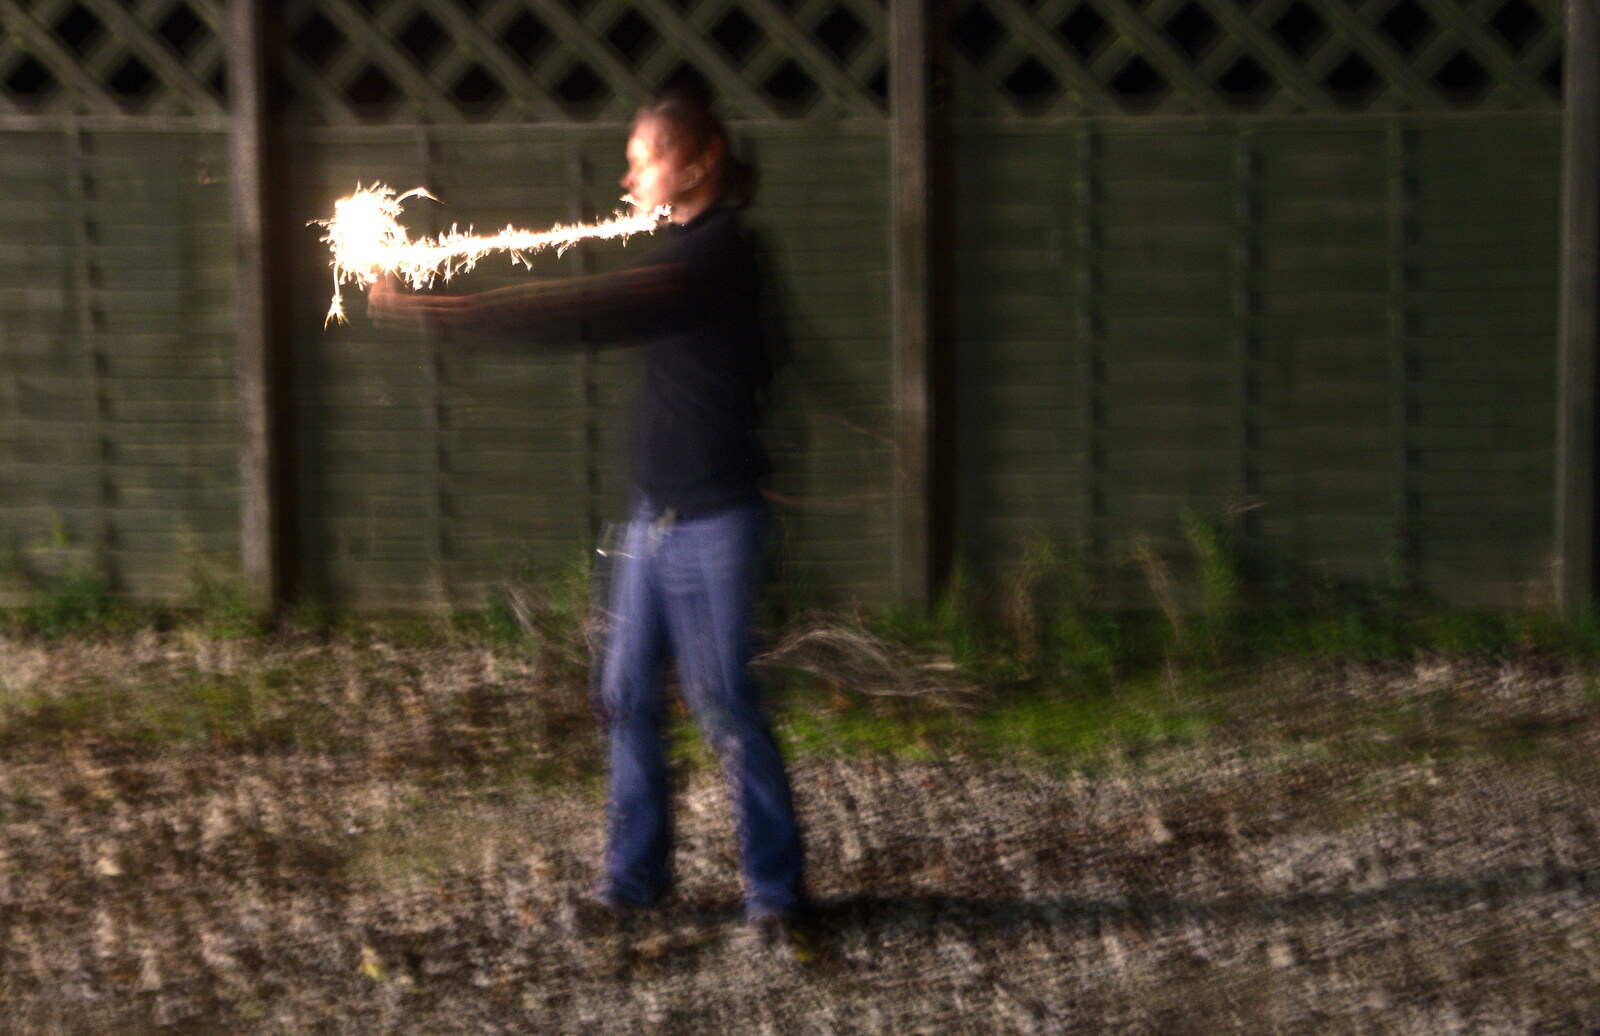 Isobel and a sparkler from The BBs at Centre Parcs, Elvedon, Norfolk - 5th November 2015